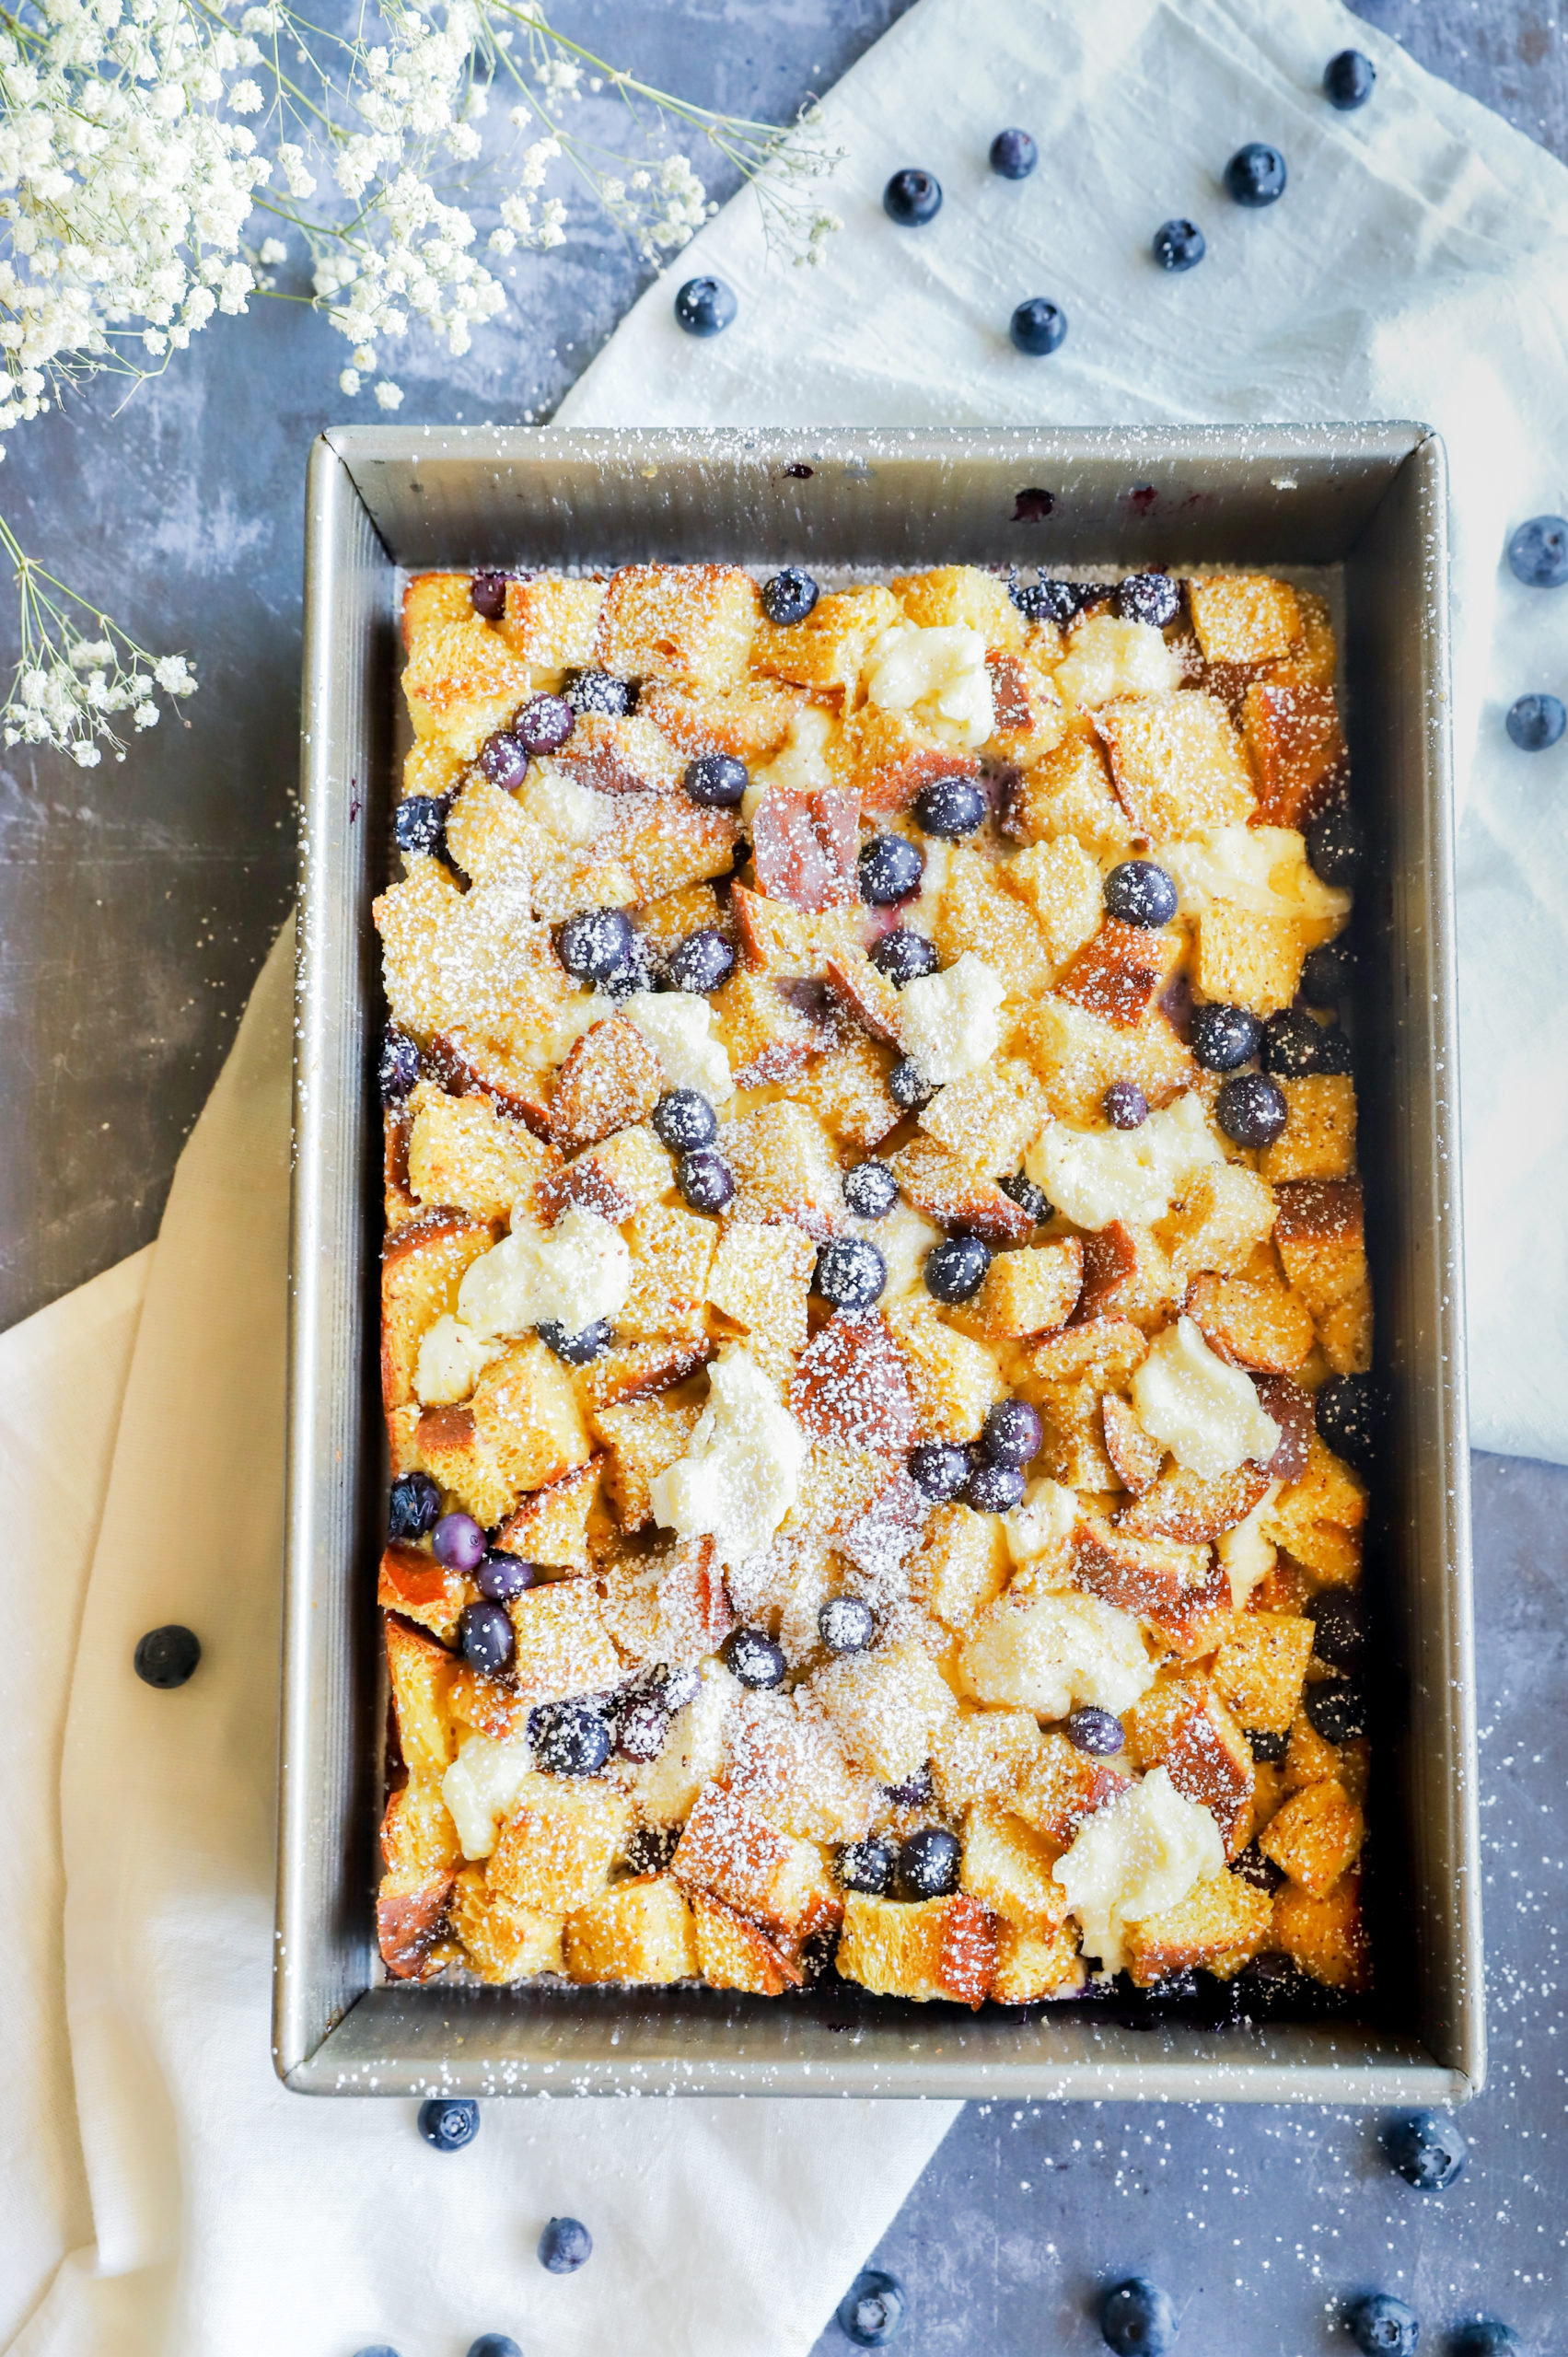 https://www.cakenknife.com/wp-content/uploads/2022/06/Blueberry-Cream-Cheese-French-Toast-Casserole_3481-scaled.jpg